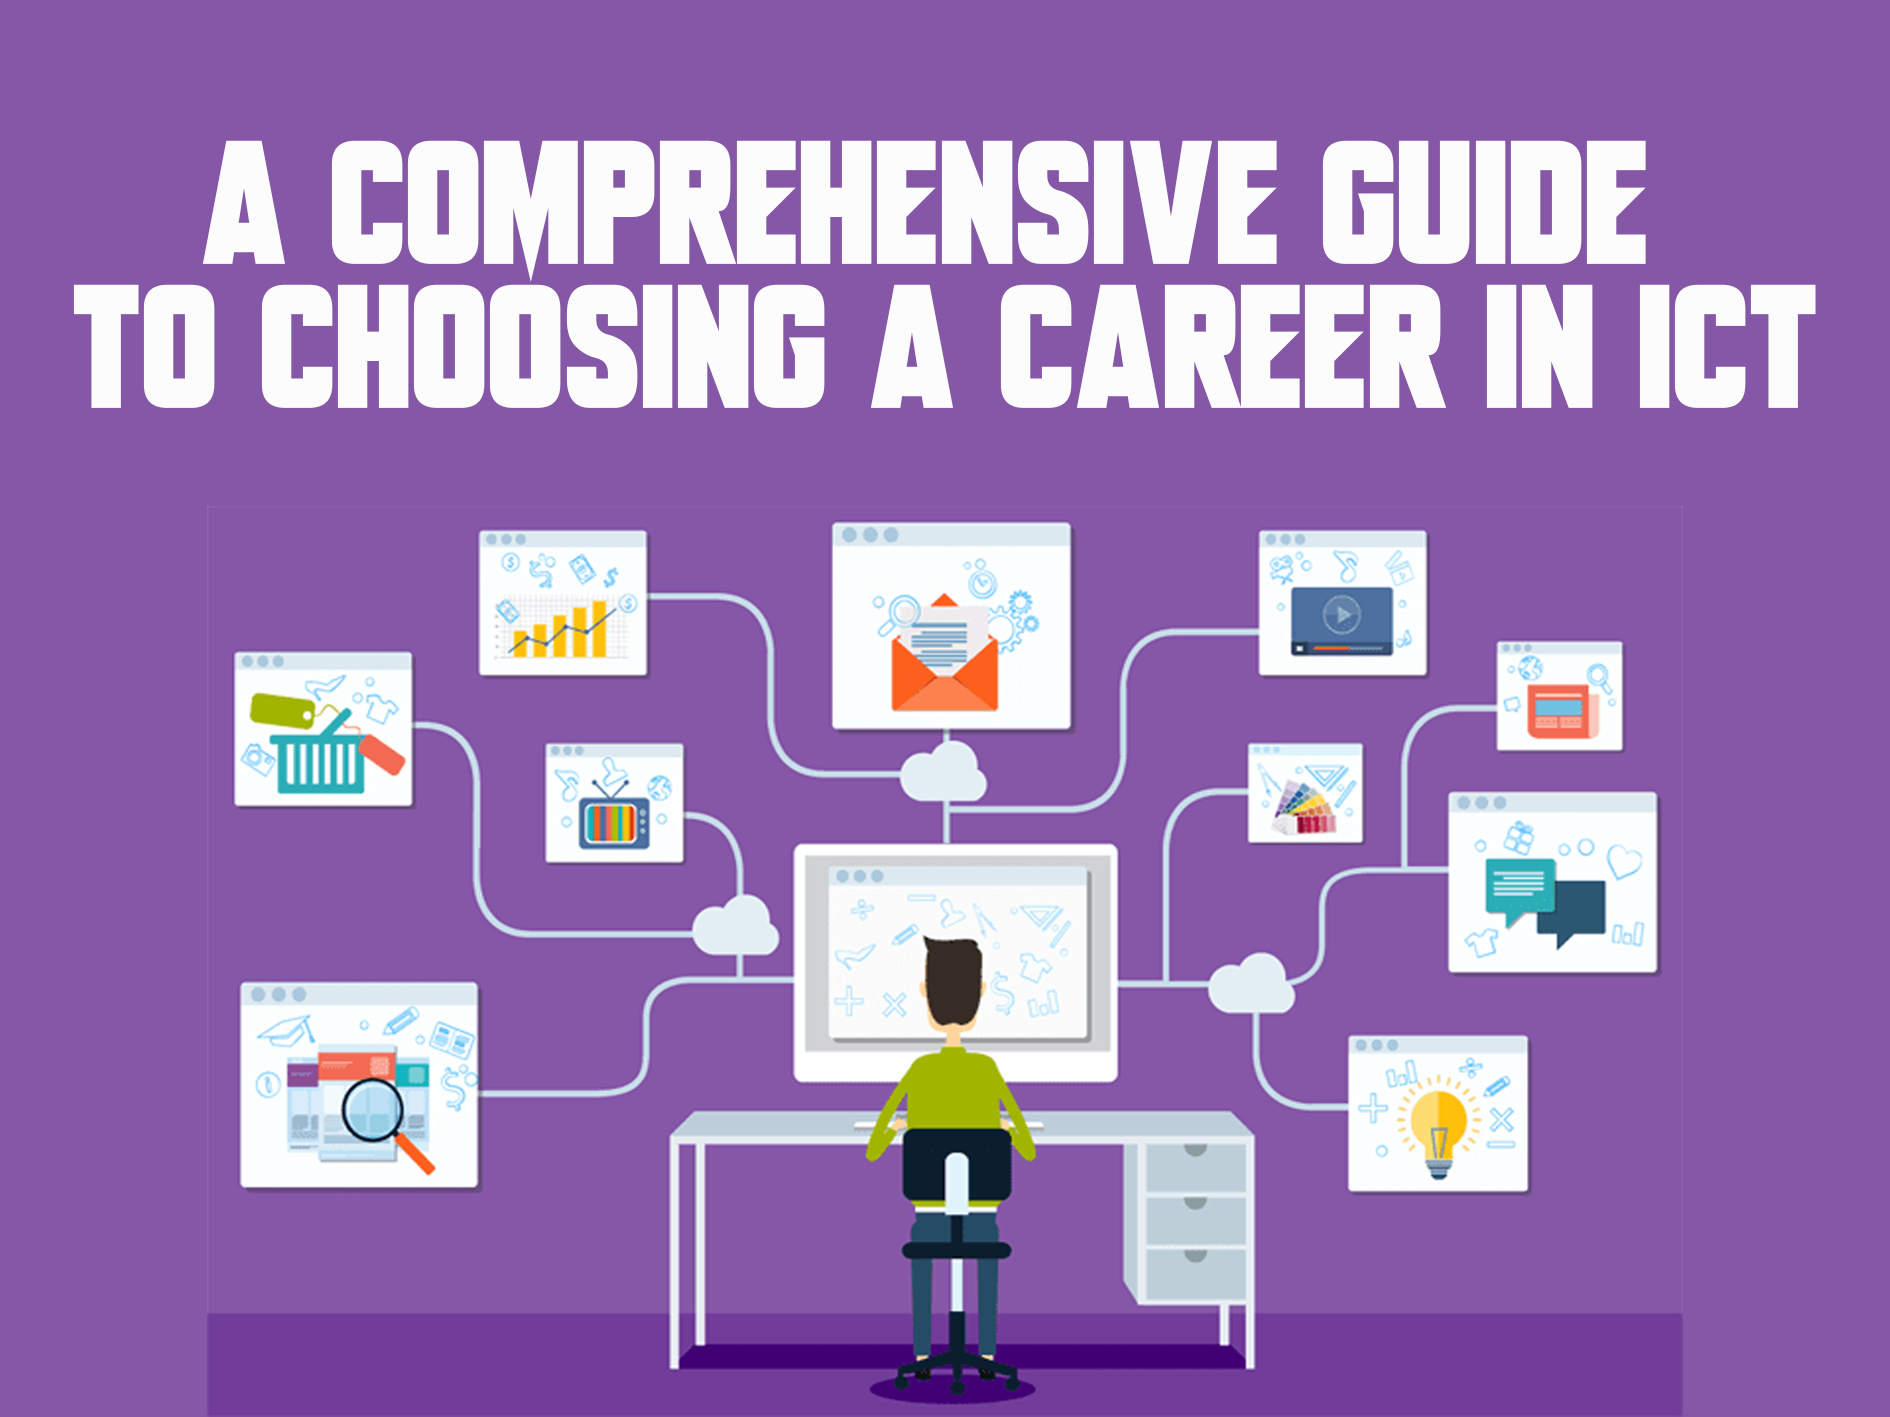 A Comprehensive Guide to Choosing a Career in ICT